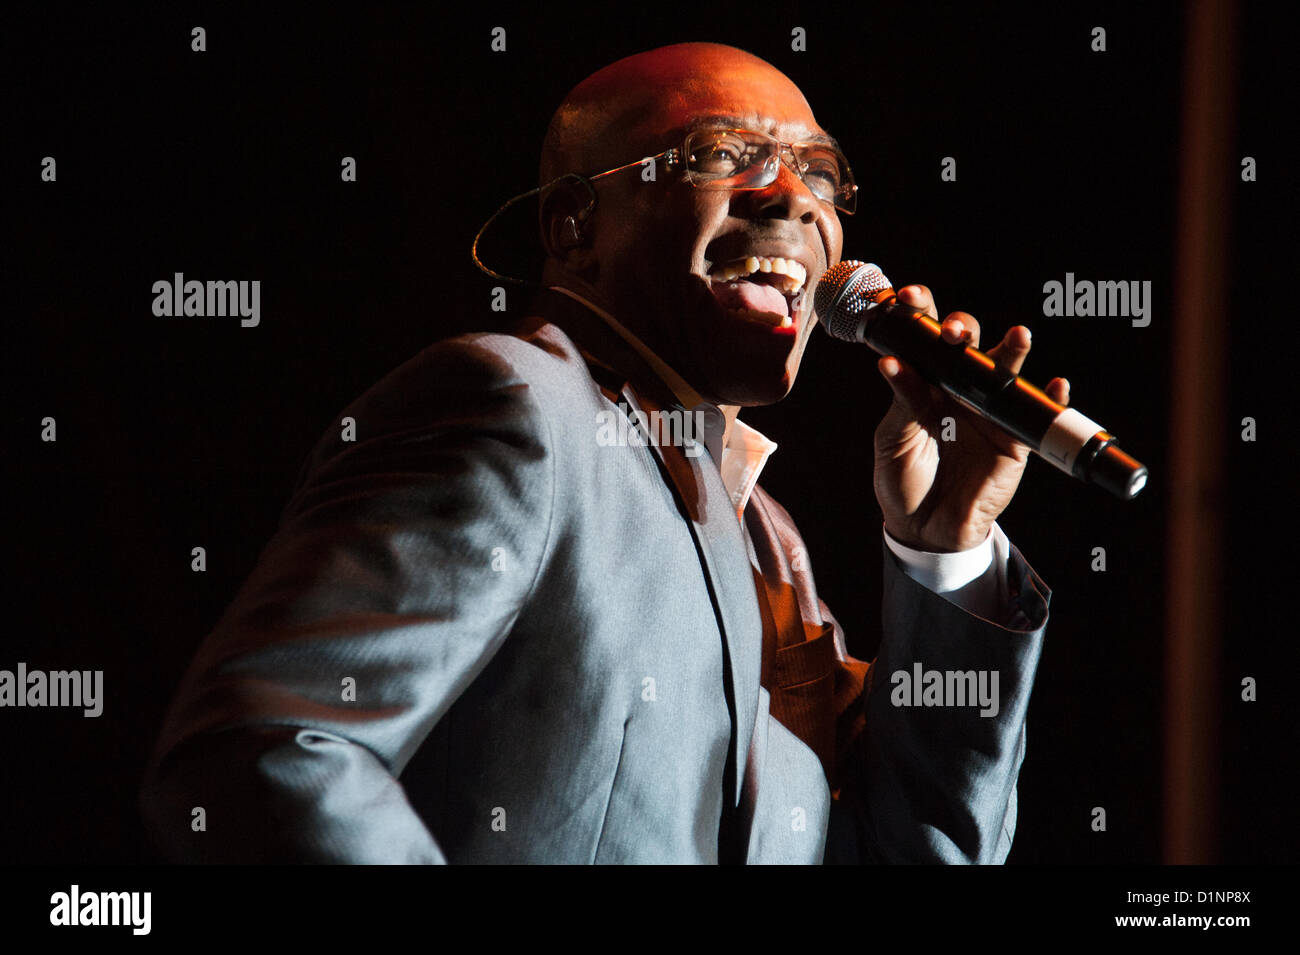 LINCOLN, CA - December 31: Larry Braggs with Tower of Power brings in the New Year at Thunder Valley Casino Resort in Lincoln, California on December 31, 2012 Stock Photo